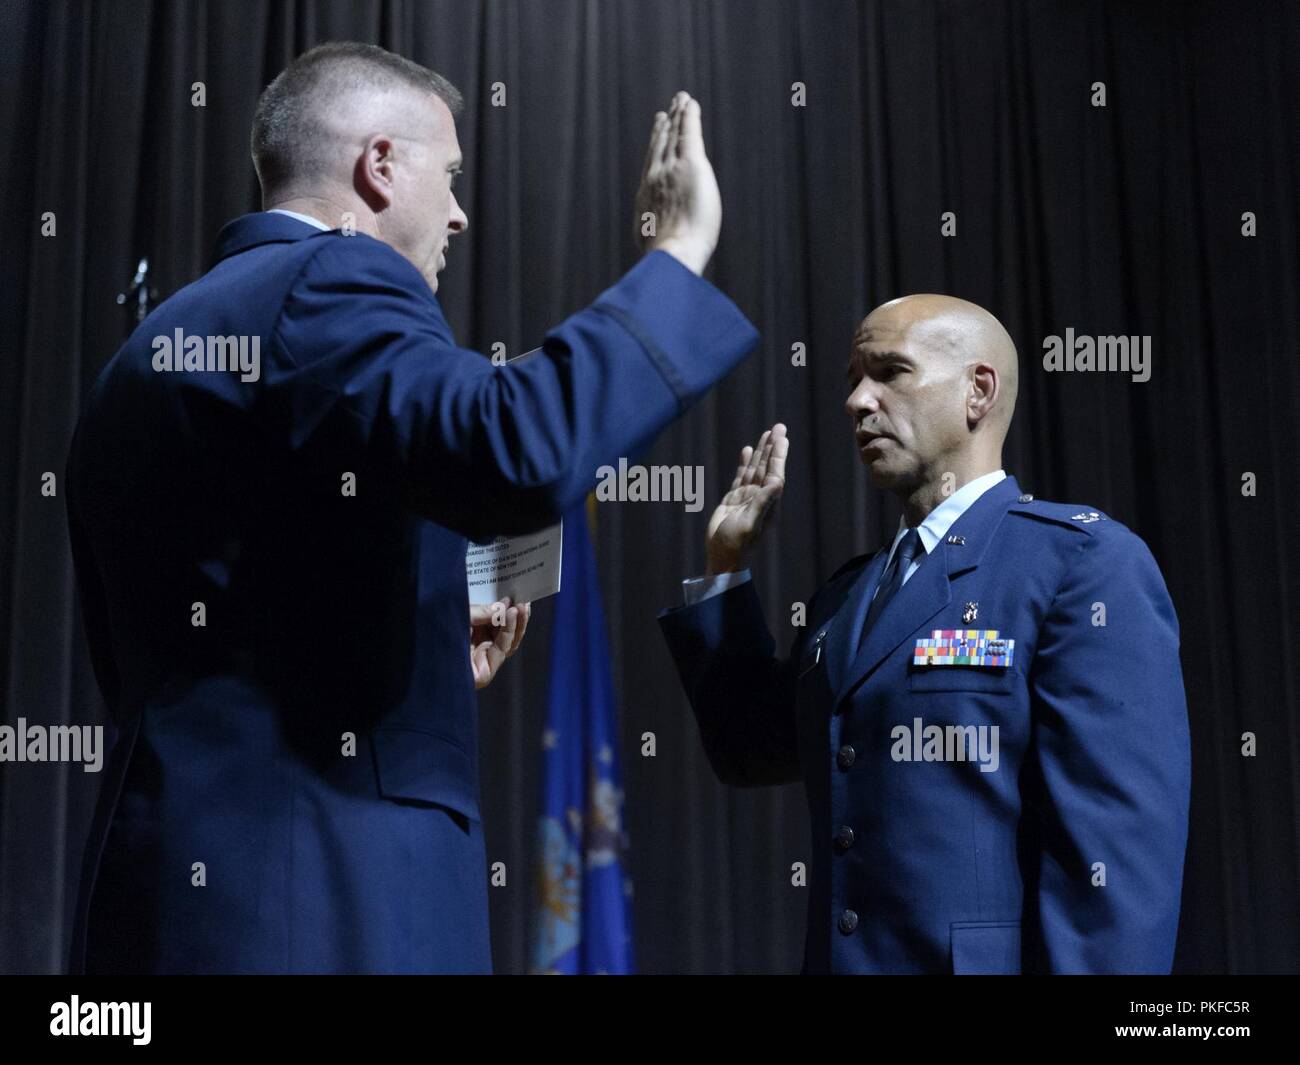 Col. Robert Kilgore, commander of the 107th Attack Wing, New York National Guard, administers the colonel's charge to Col. Eric Laughton, commander of the 107th Medical Group, 107th ATKW, during a promotion ceremony at Niagara Falls Air Reserve Station, N.Y., Aug. 11, 2018. Laughton is promoted after having recently taken command of the 107th MDG. Stock Photo